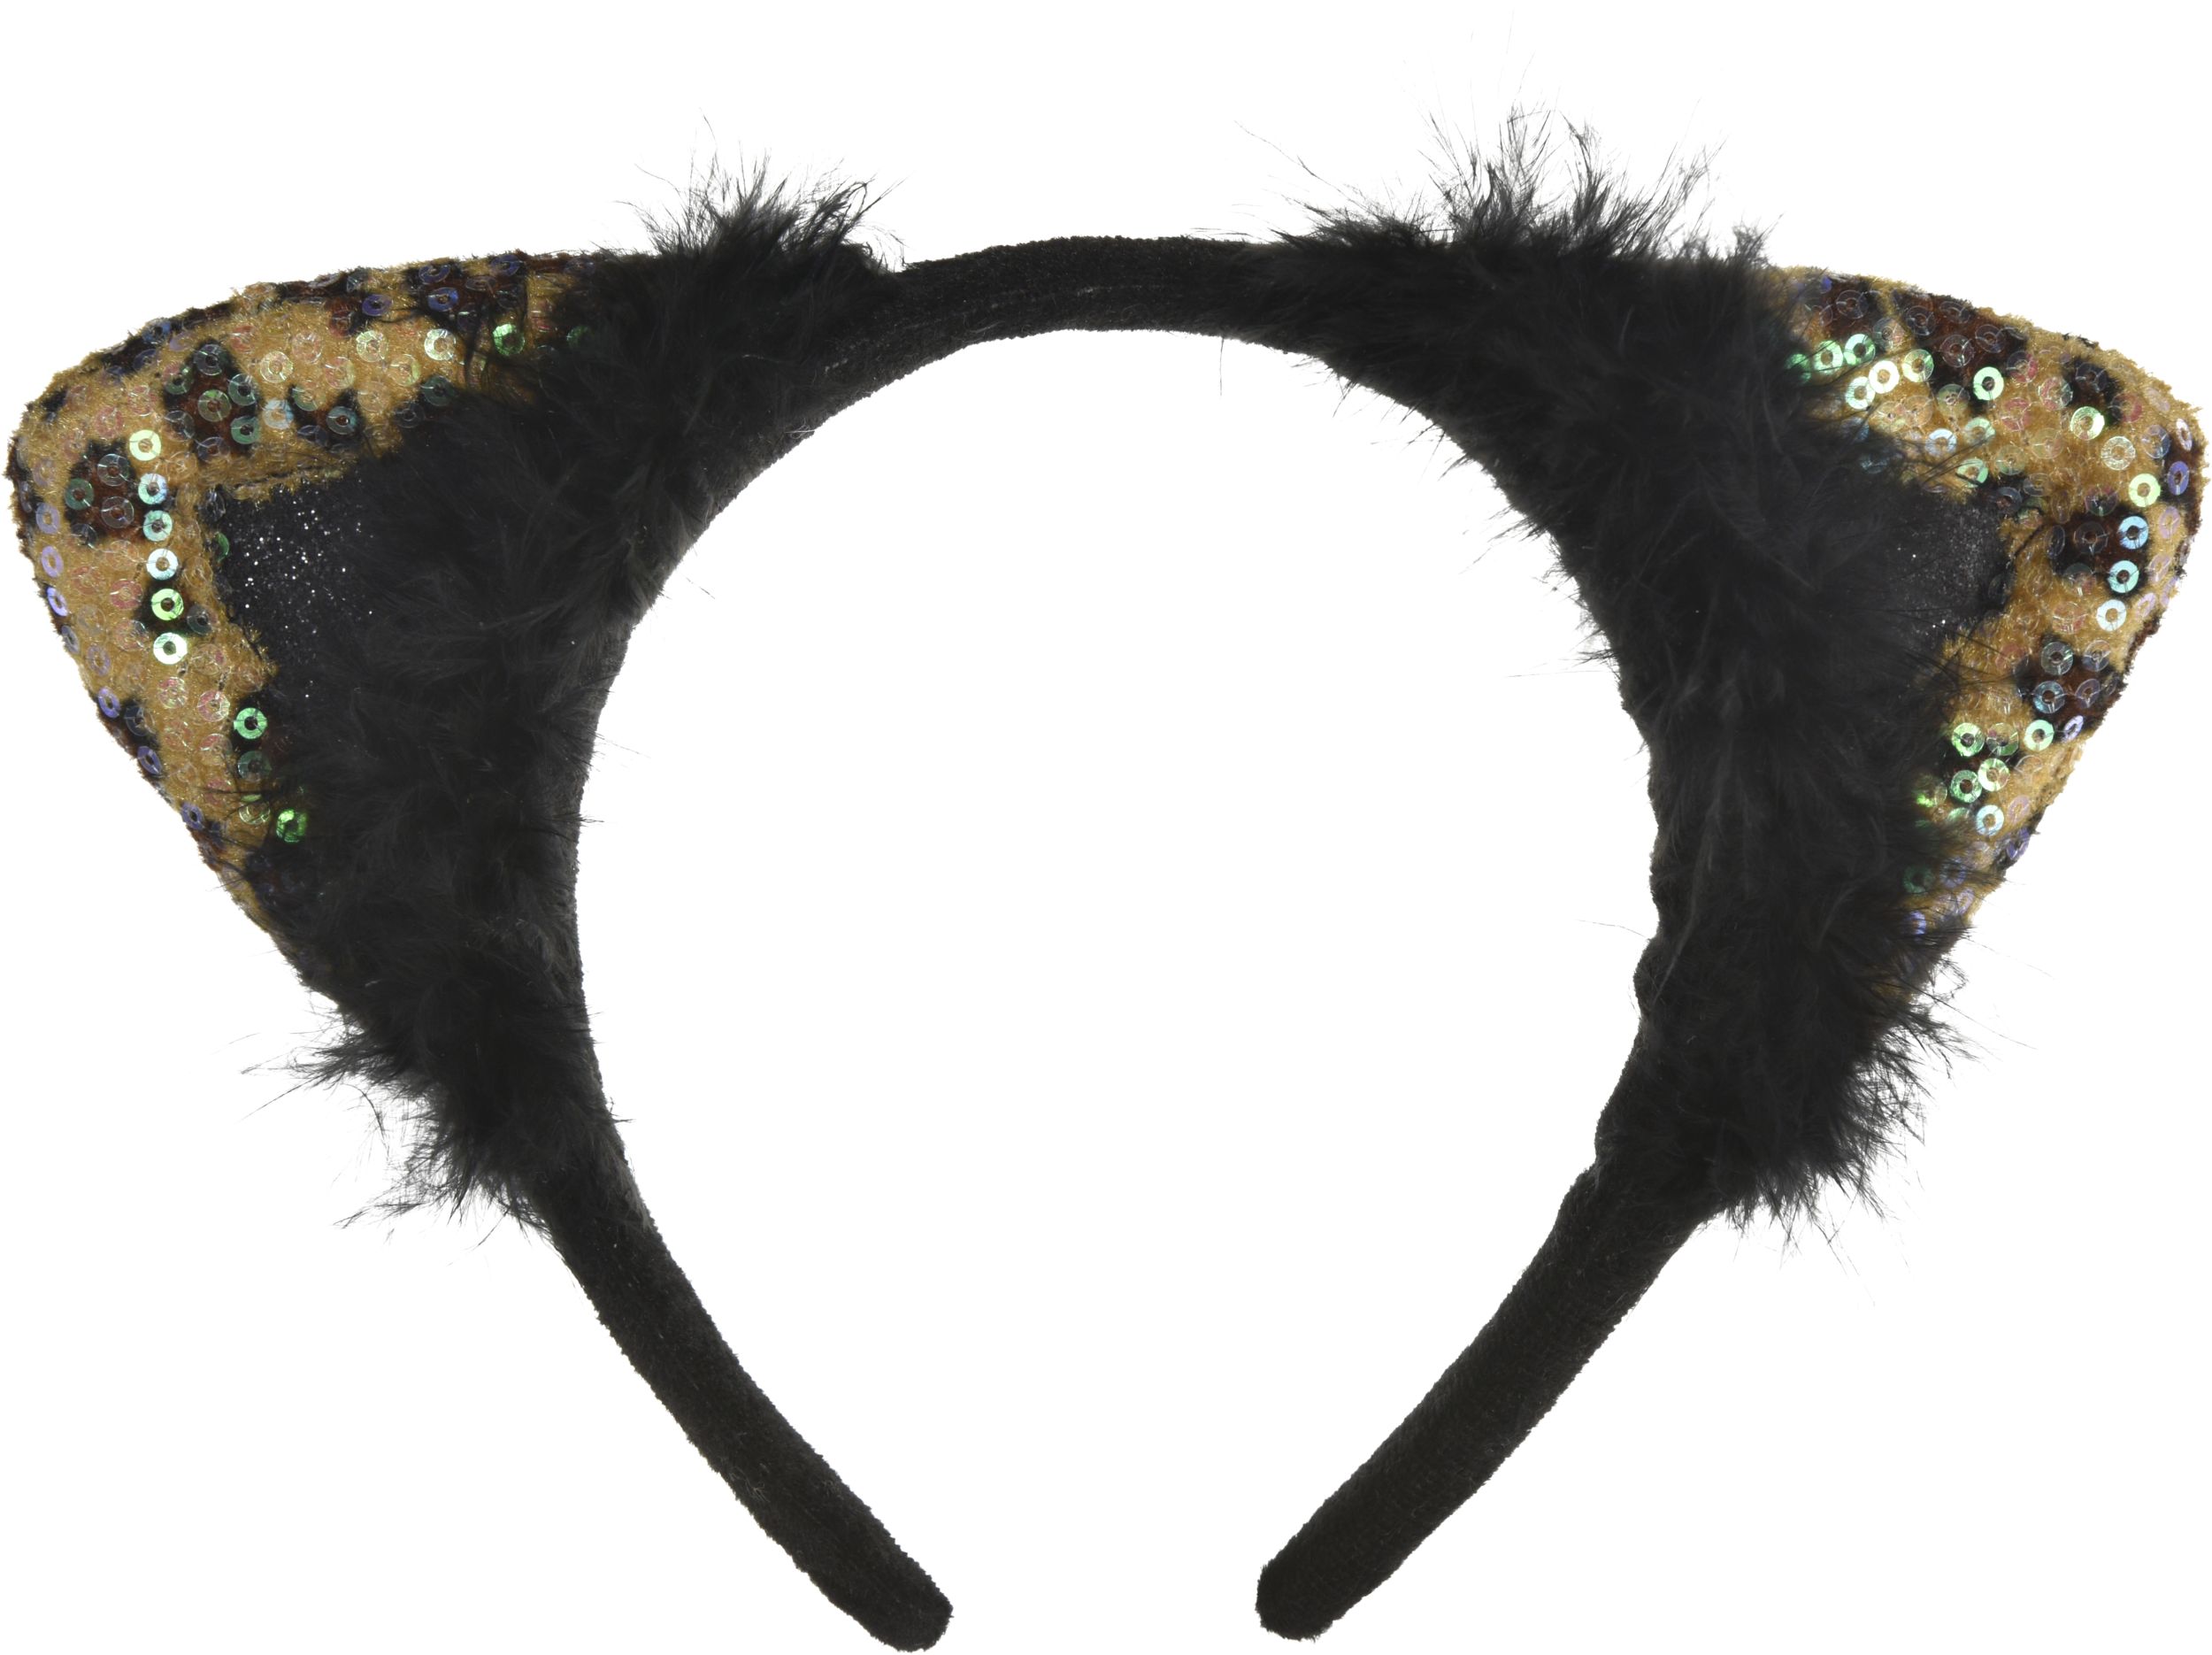 Chic Sequin Cheetah Cat Ears Headband, Brown/Black, One Size, Wearable  Costume Accessory for Halloween